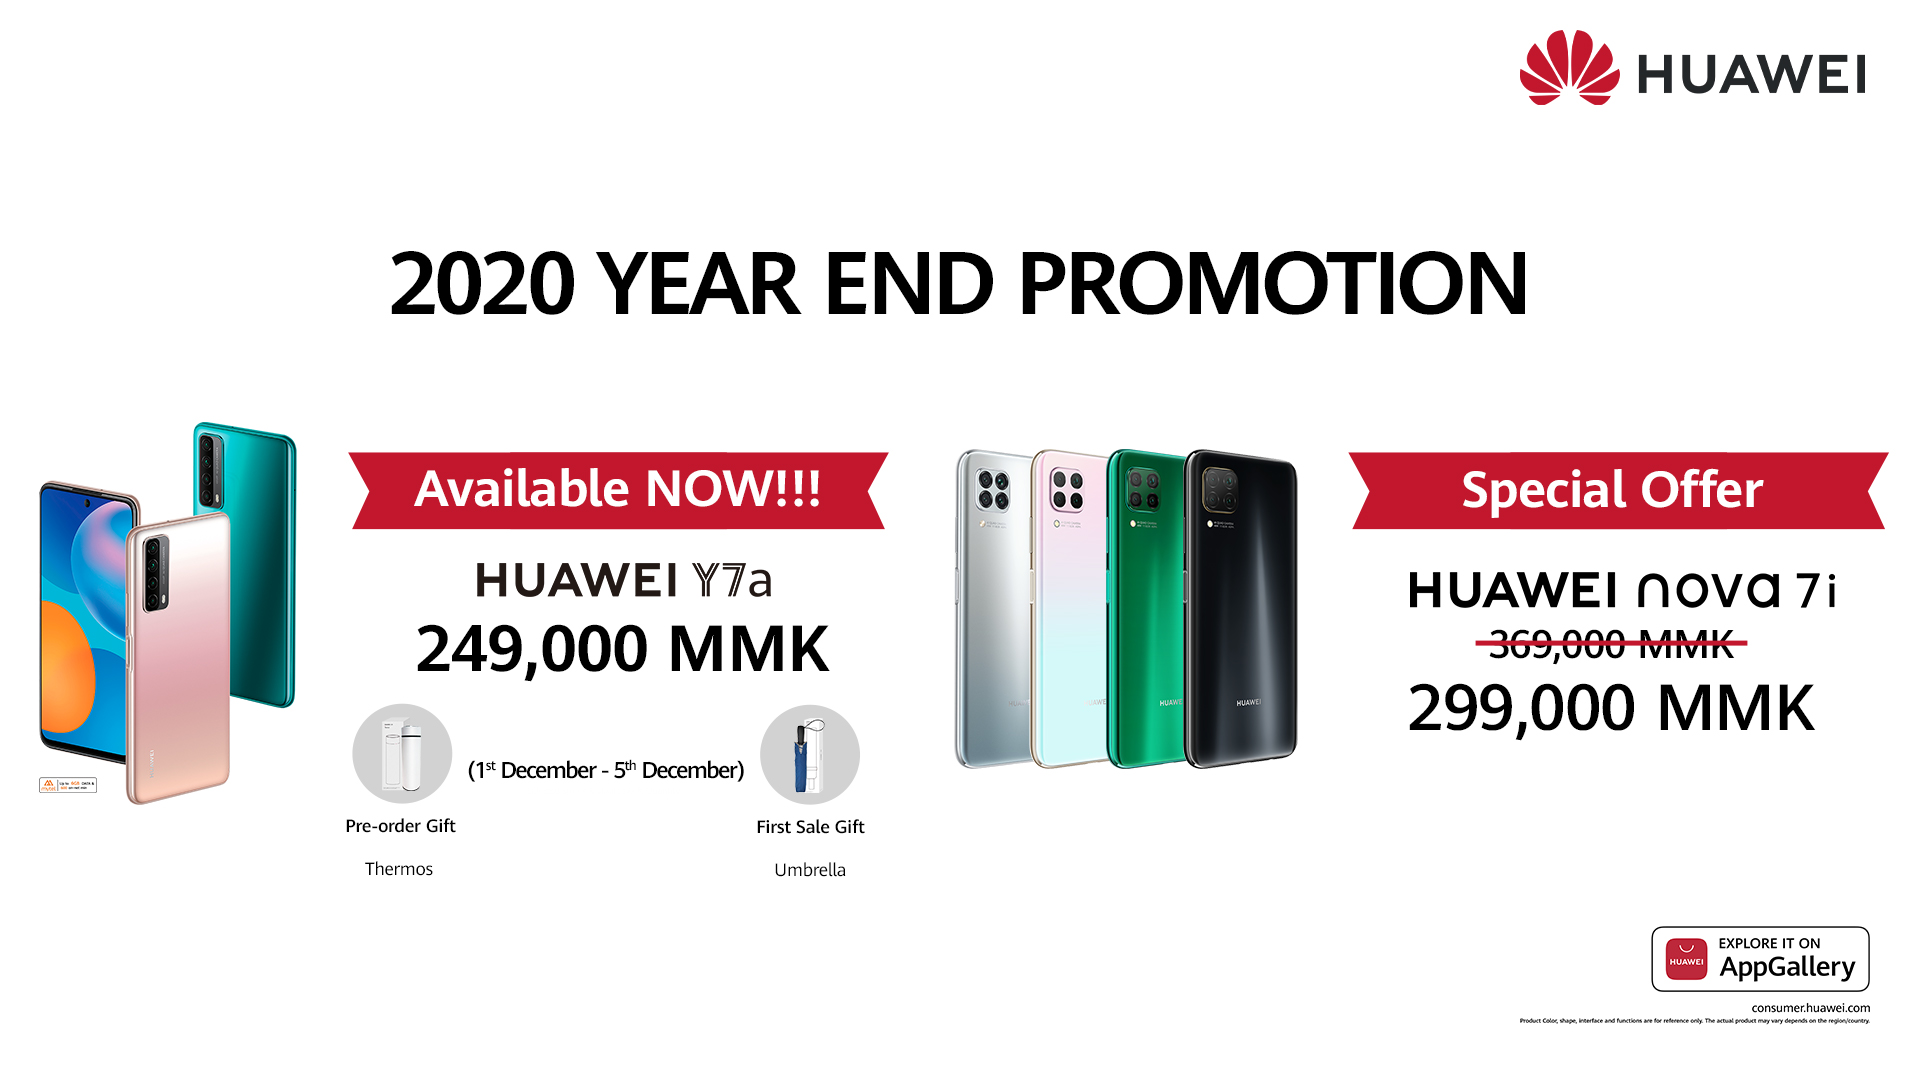 verschijnen aftrekken dubbele HUAWEI nova 7i can be bought at a special price with the Year-End Promotion  and the new HUAWEI Y7a across Myanmar | Myanmar Tech Press